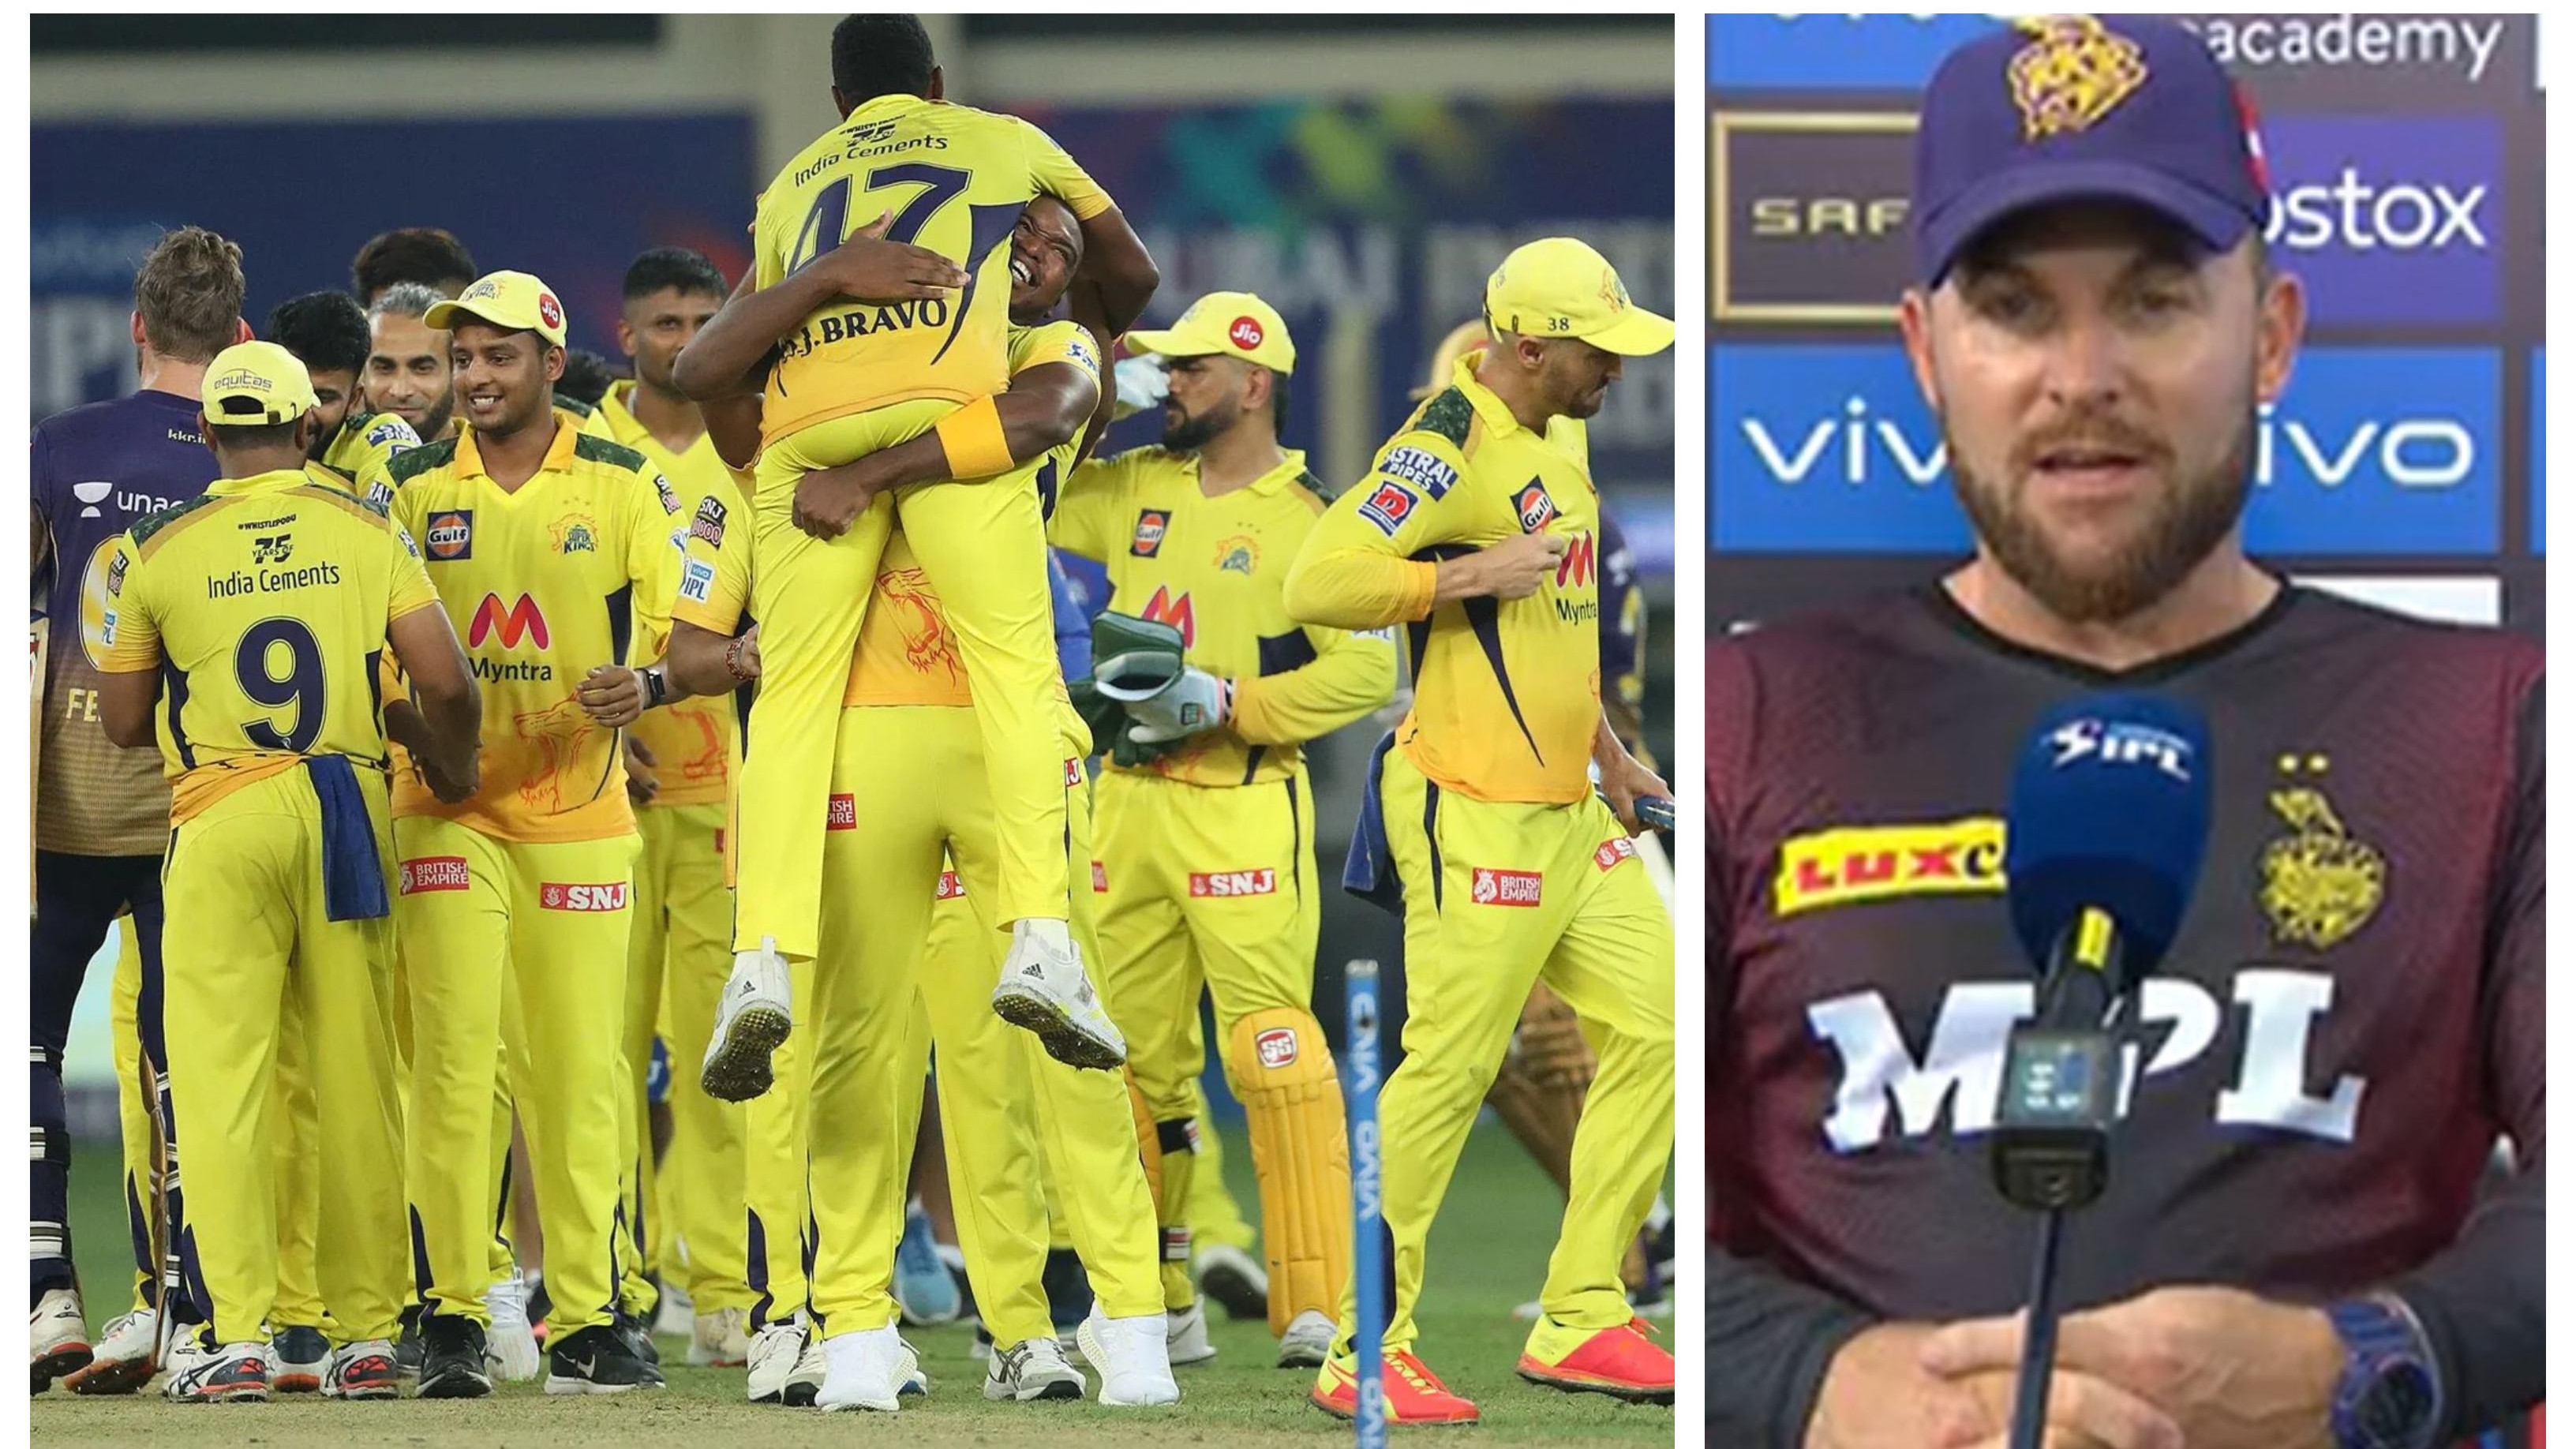 IPL 2021: “We were outplayed by a very good CSK side”, admits KKR head coach Brendon McCullum